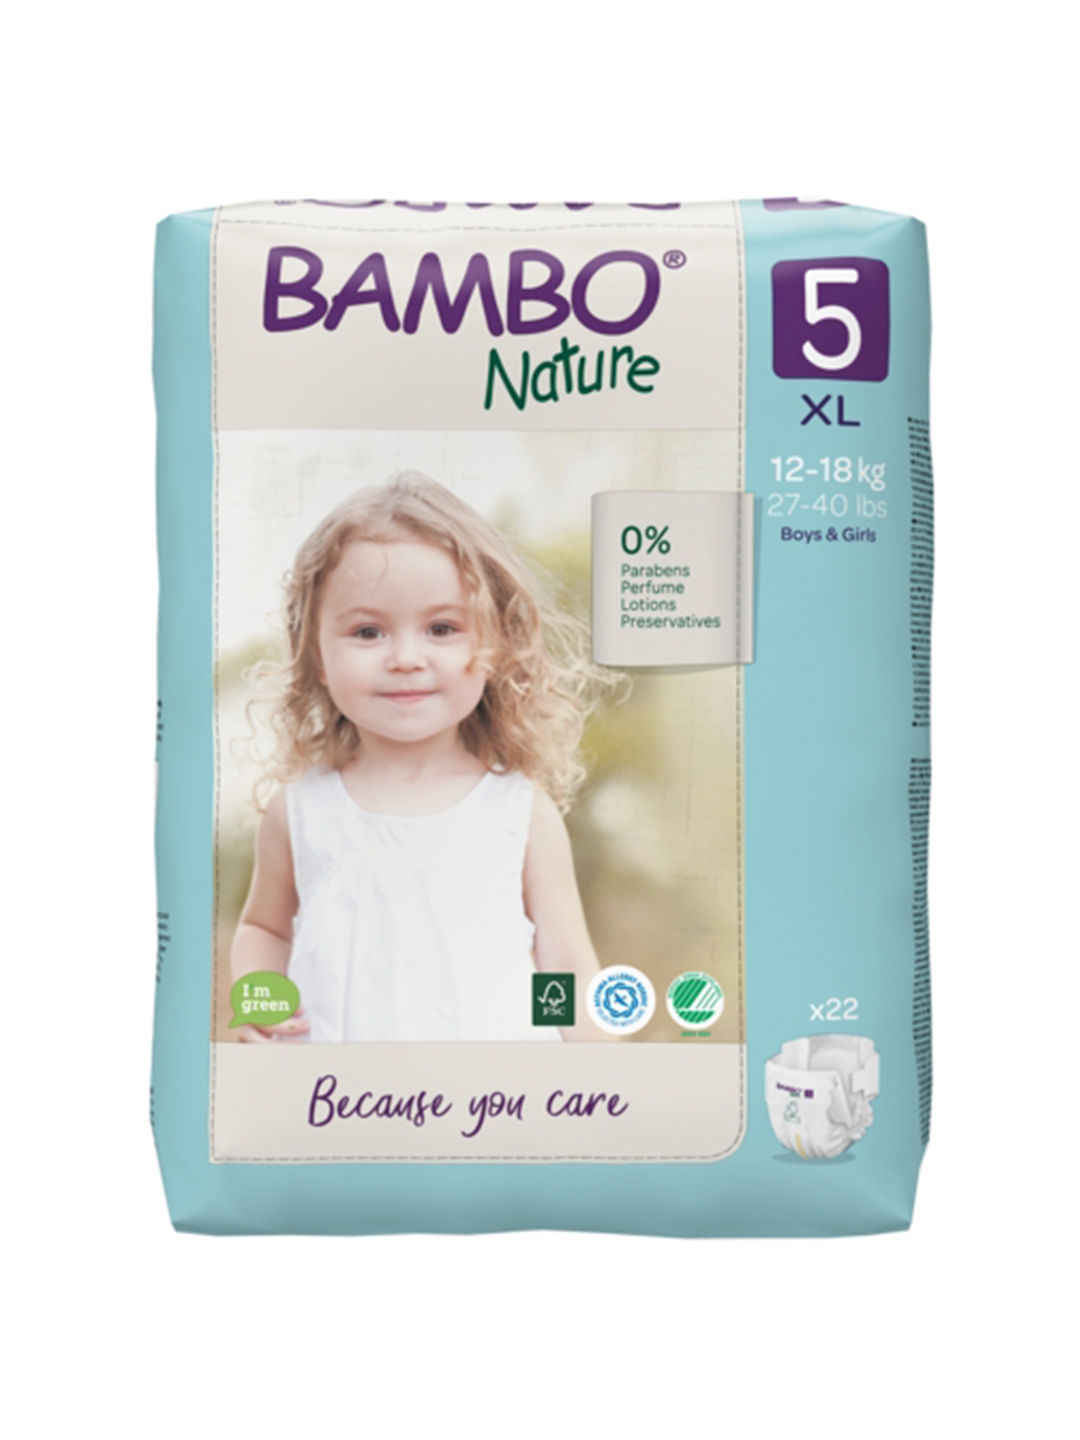 Bambo Nature Premium Baby Diapers - XL Size, 22 Count For Toddler Baby